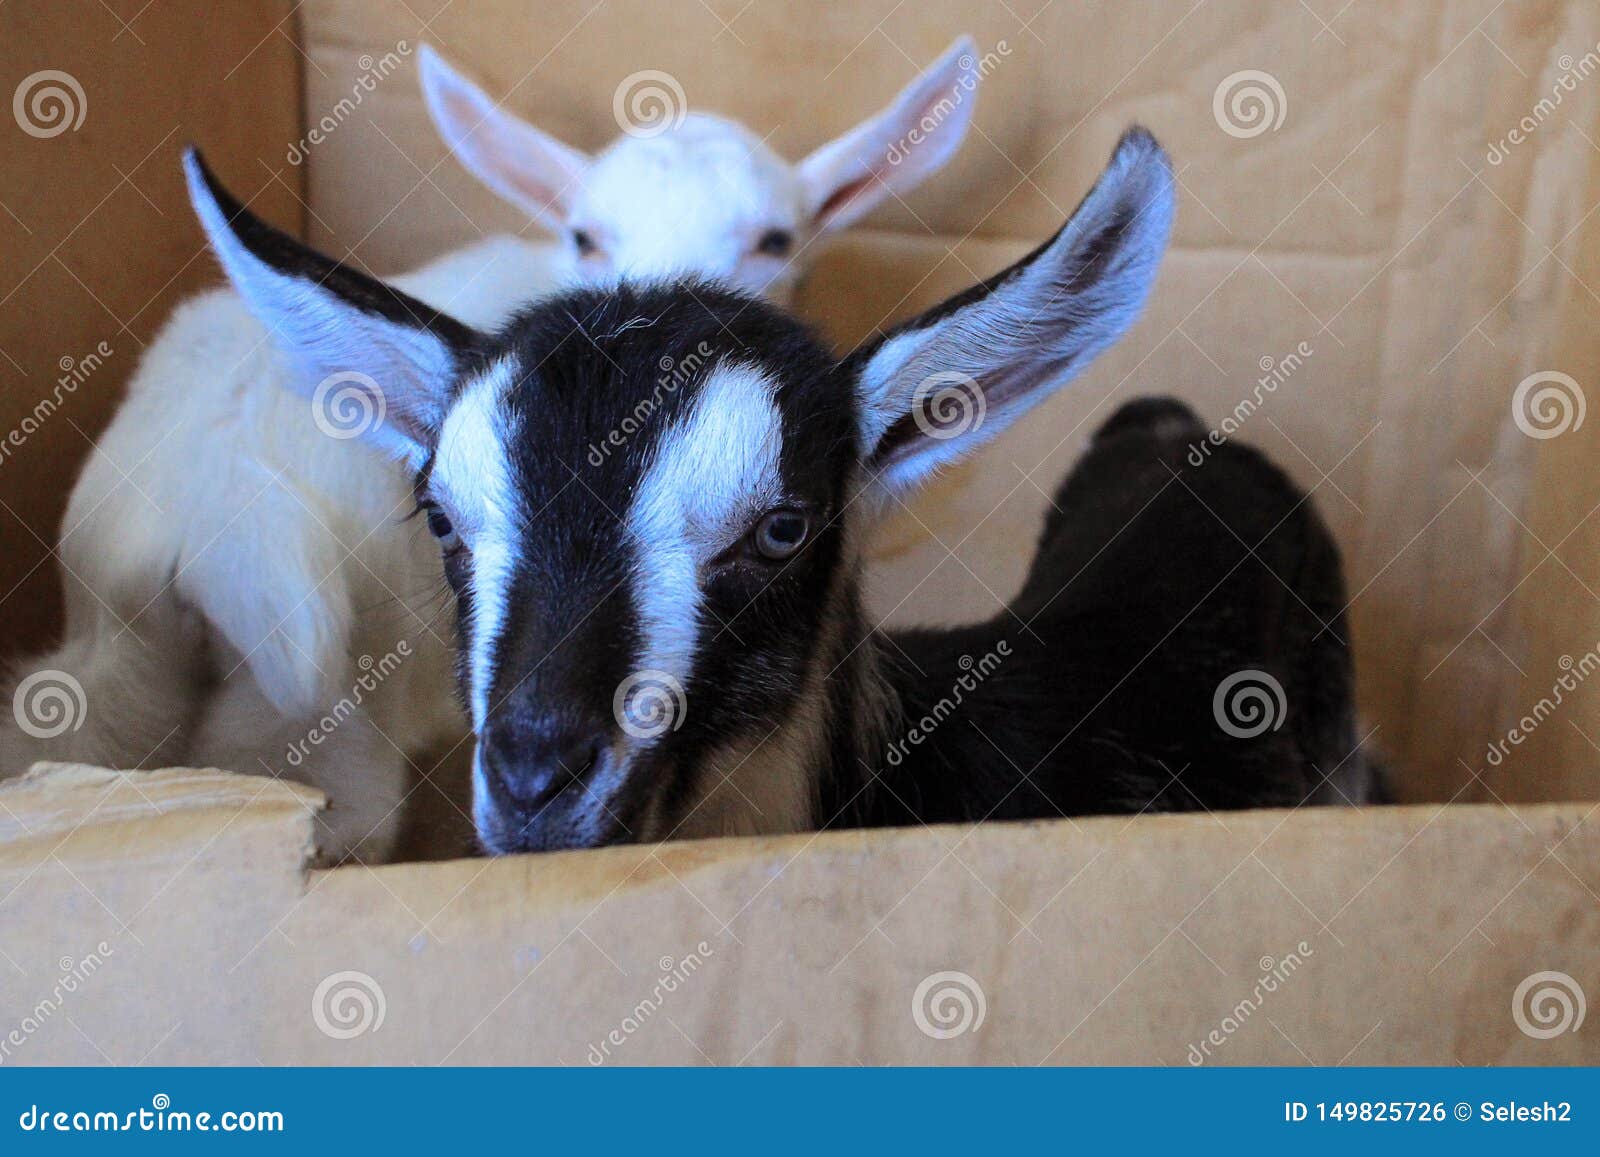 Black and White Little Goat with Big Ears in the Foreground. Behind is a  White Goat Stock Photo - Image of small, goat: 149825726